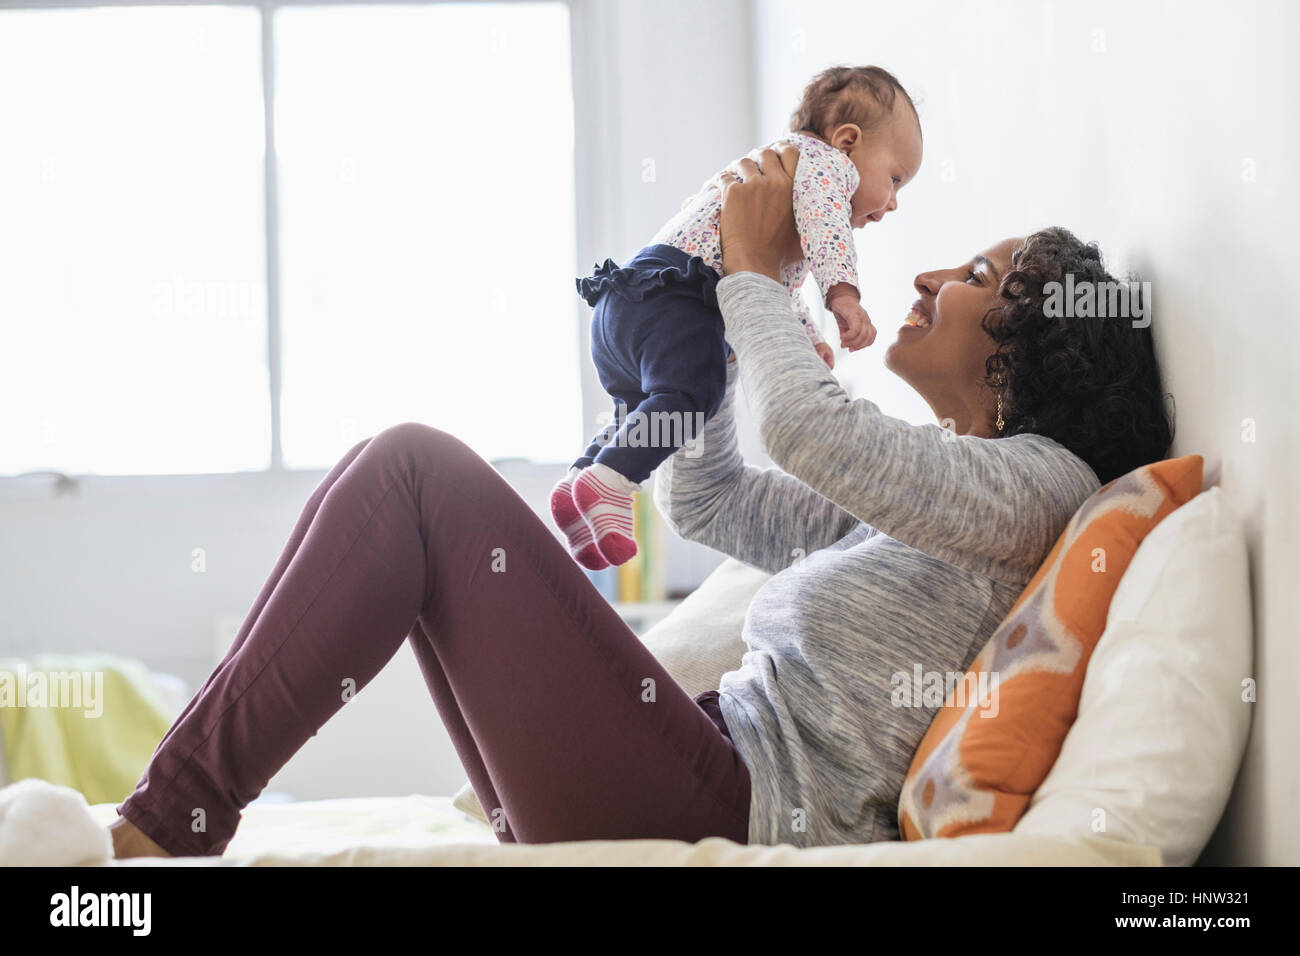 Hispanic mother playing with baby daughter on bed Stock Photo